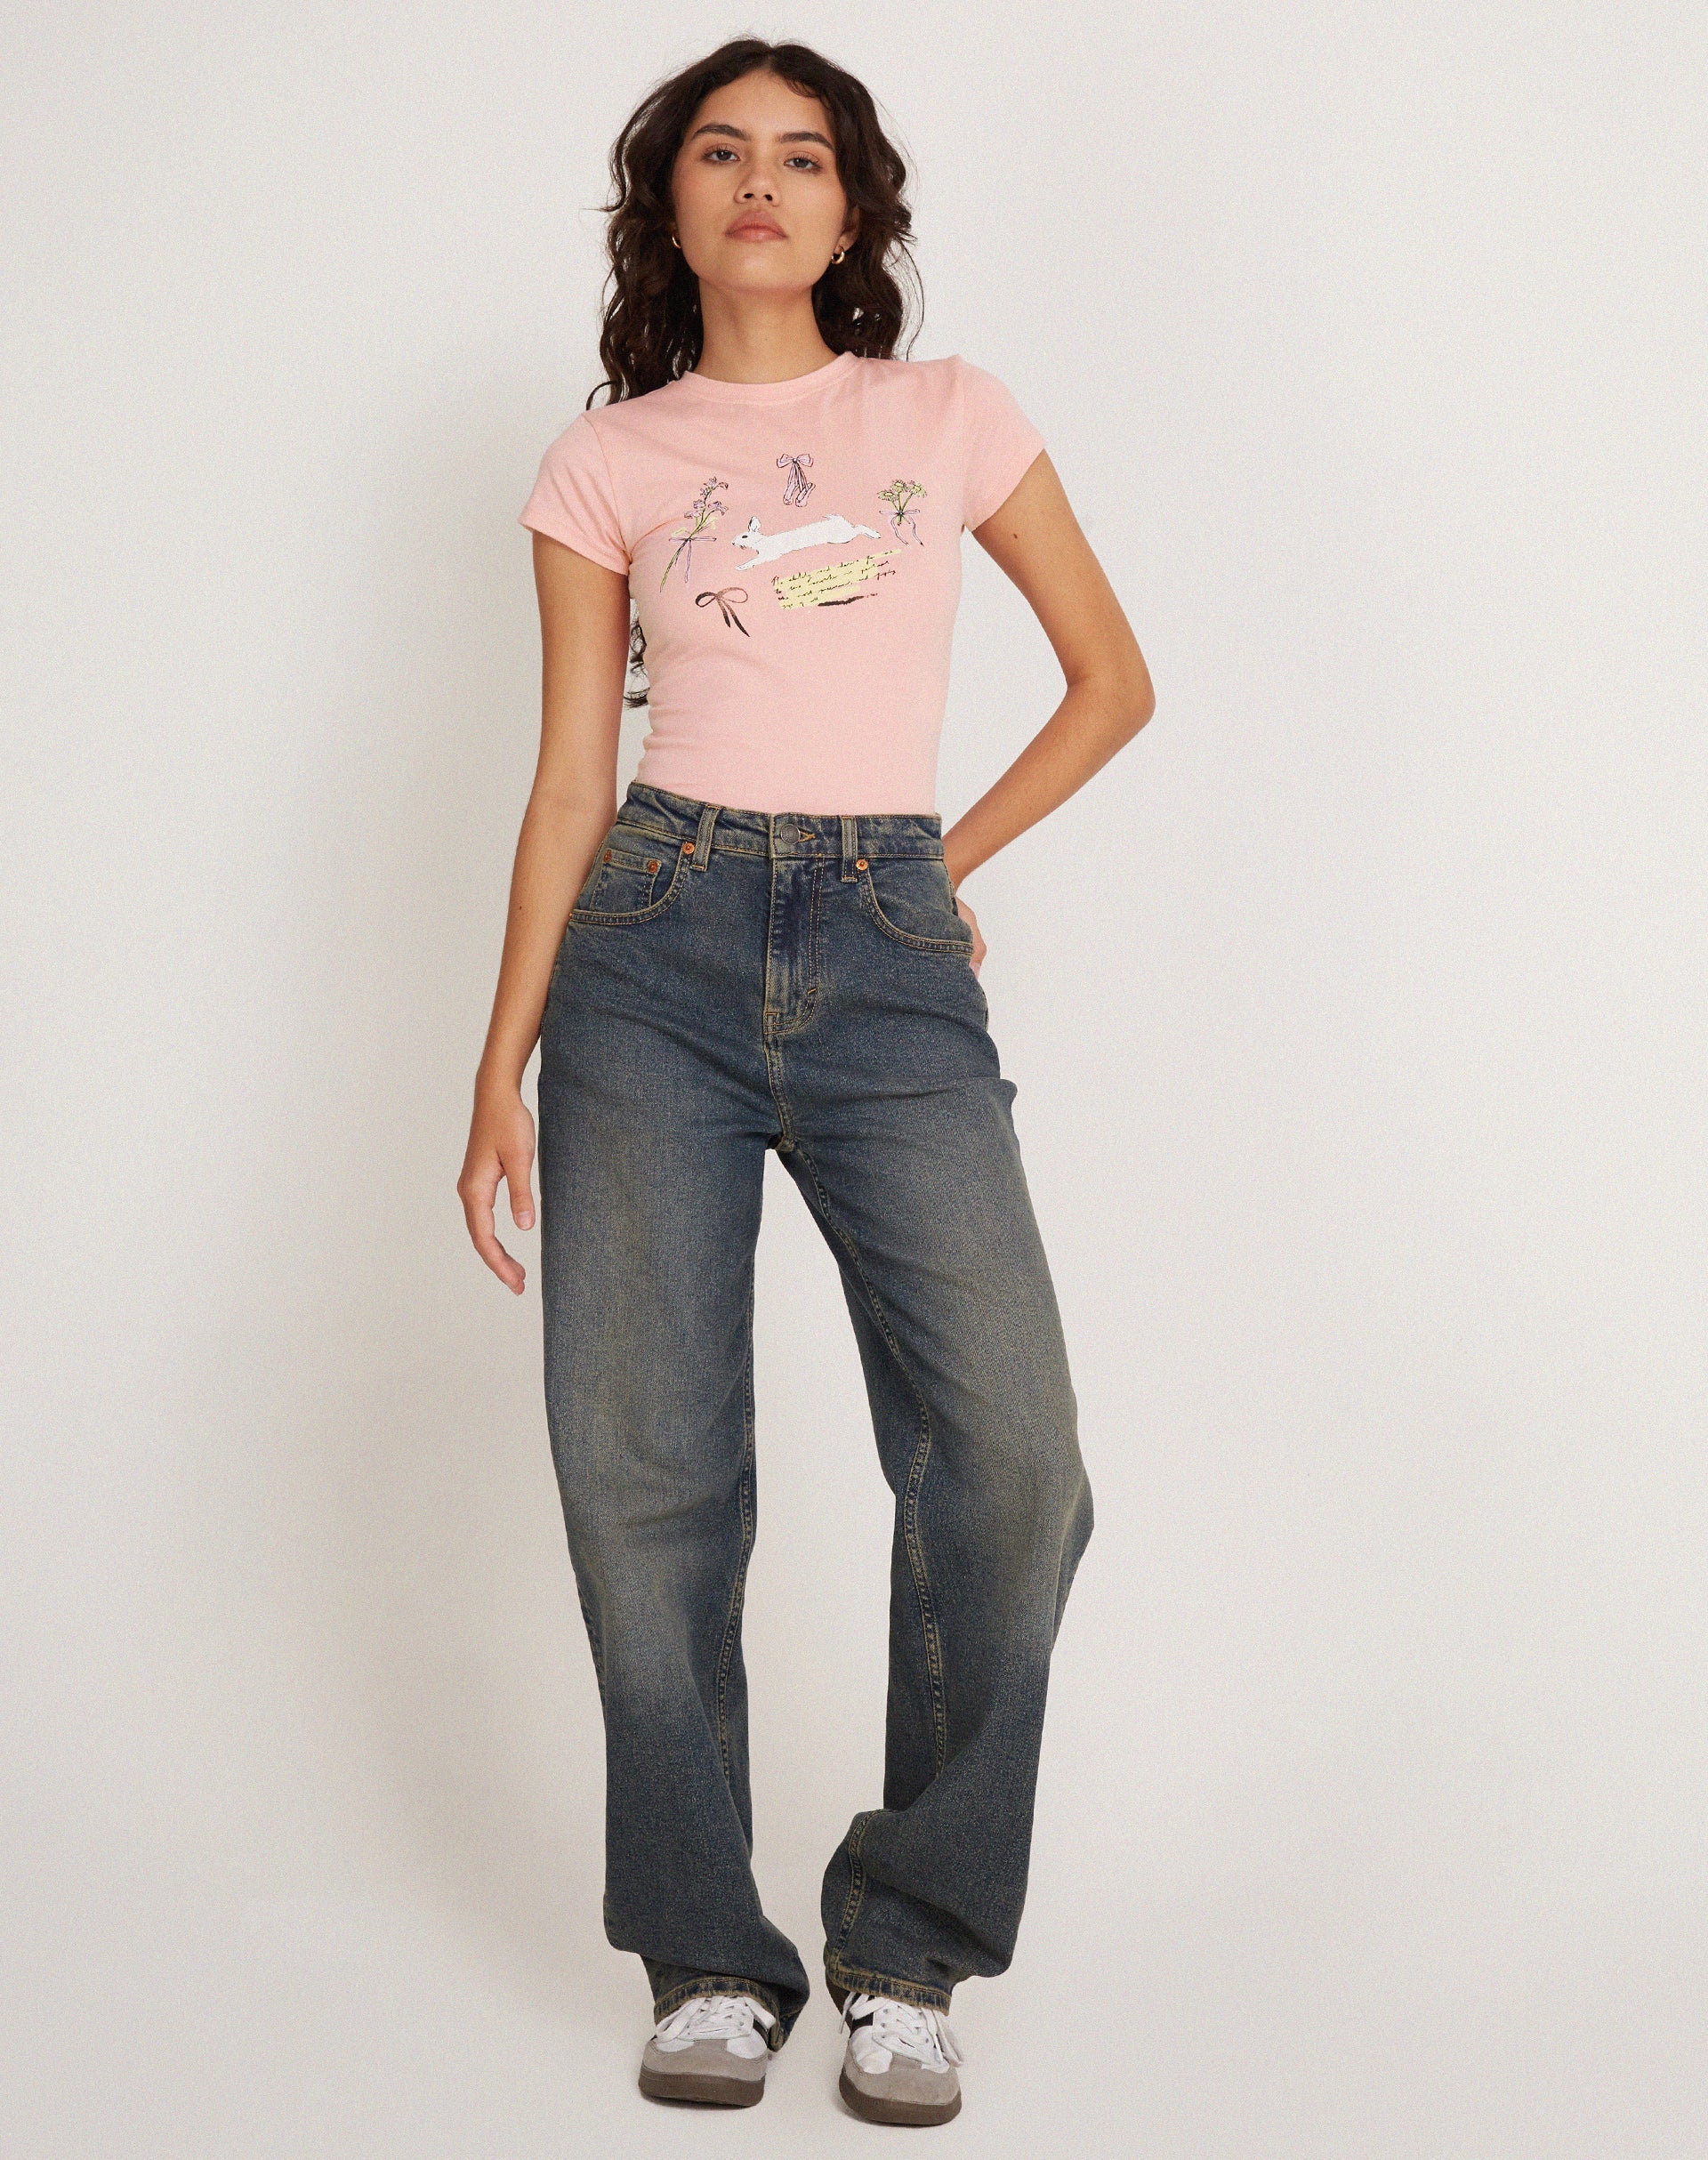 Image of Tiona Cropped Tee in Peony Pink Bunny